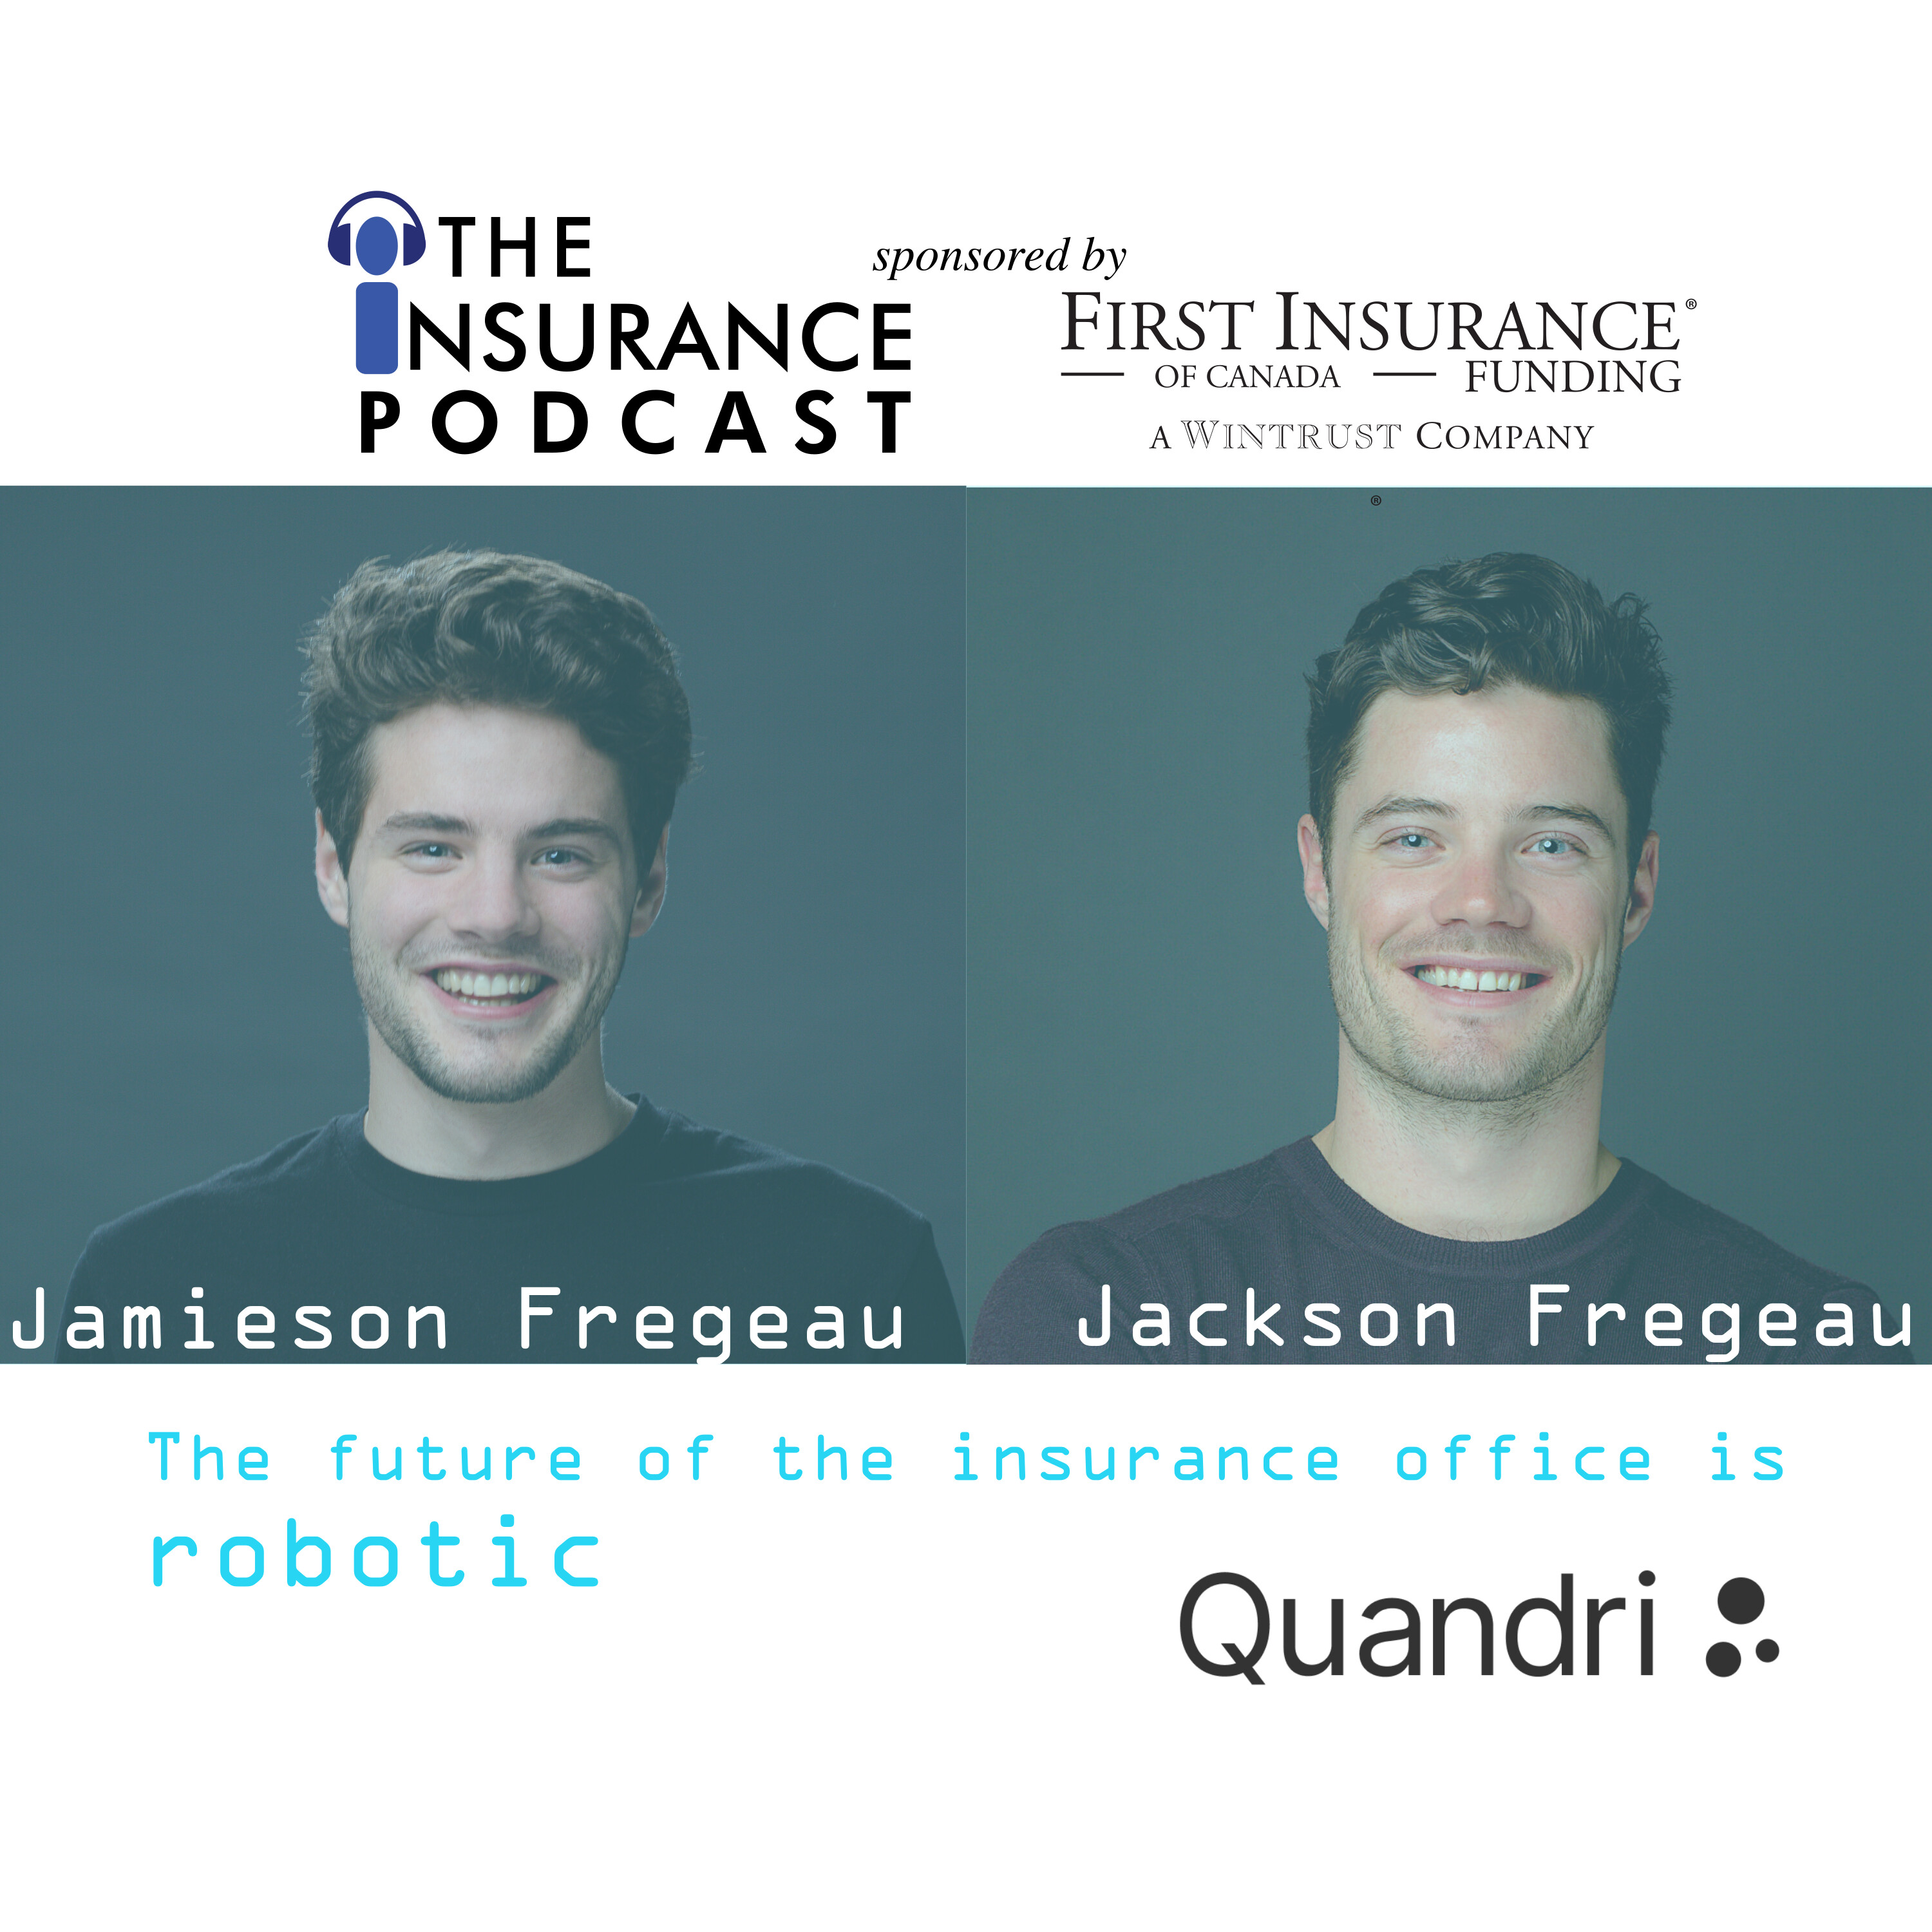 Robotic workers are the insurance back-office future with Quandri Image